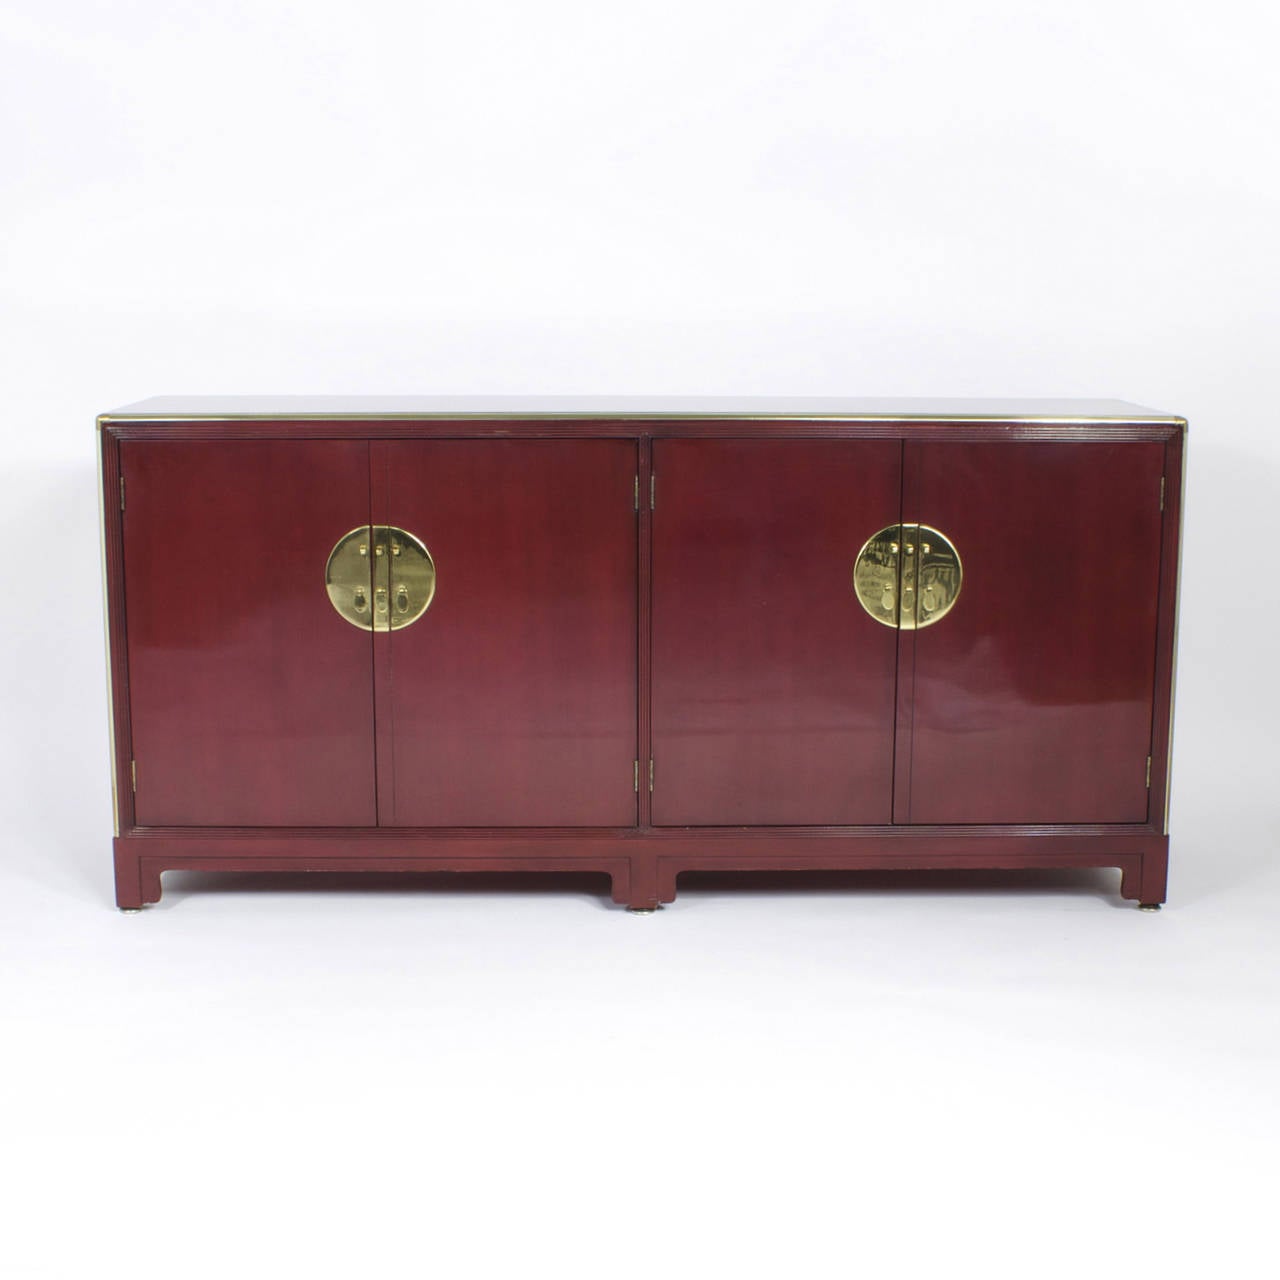 An interesting hybrid of furniture design, really gives new meaning to the phrase “Where East Meets West.” A chic Mid-Century four-door cabinet with a glazed cherry lacquer, brass outlines and with typical baker style textured corners. Featuring